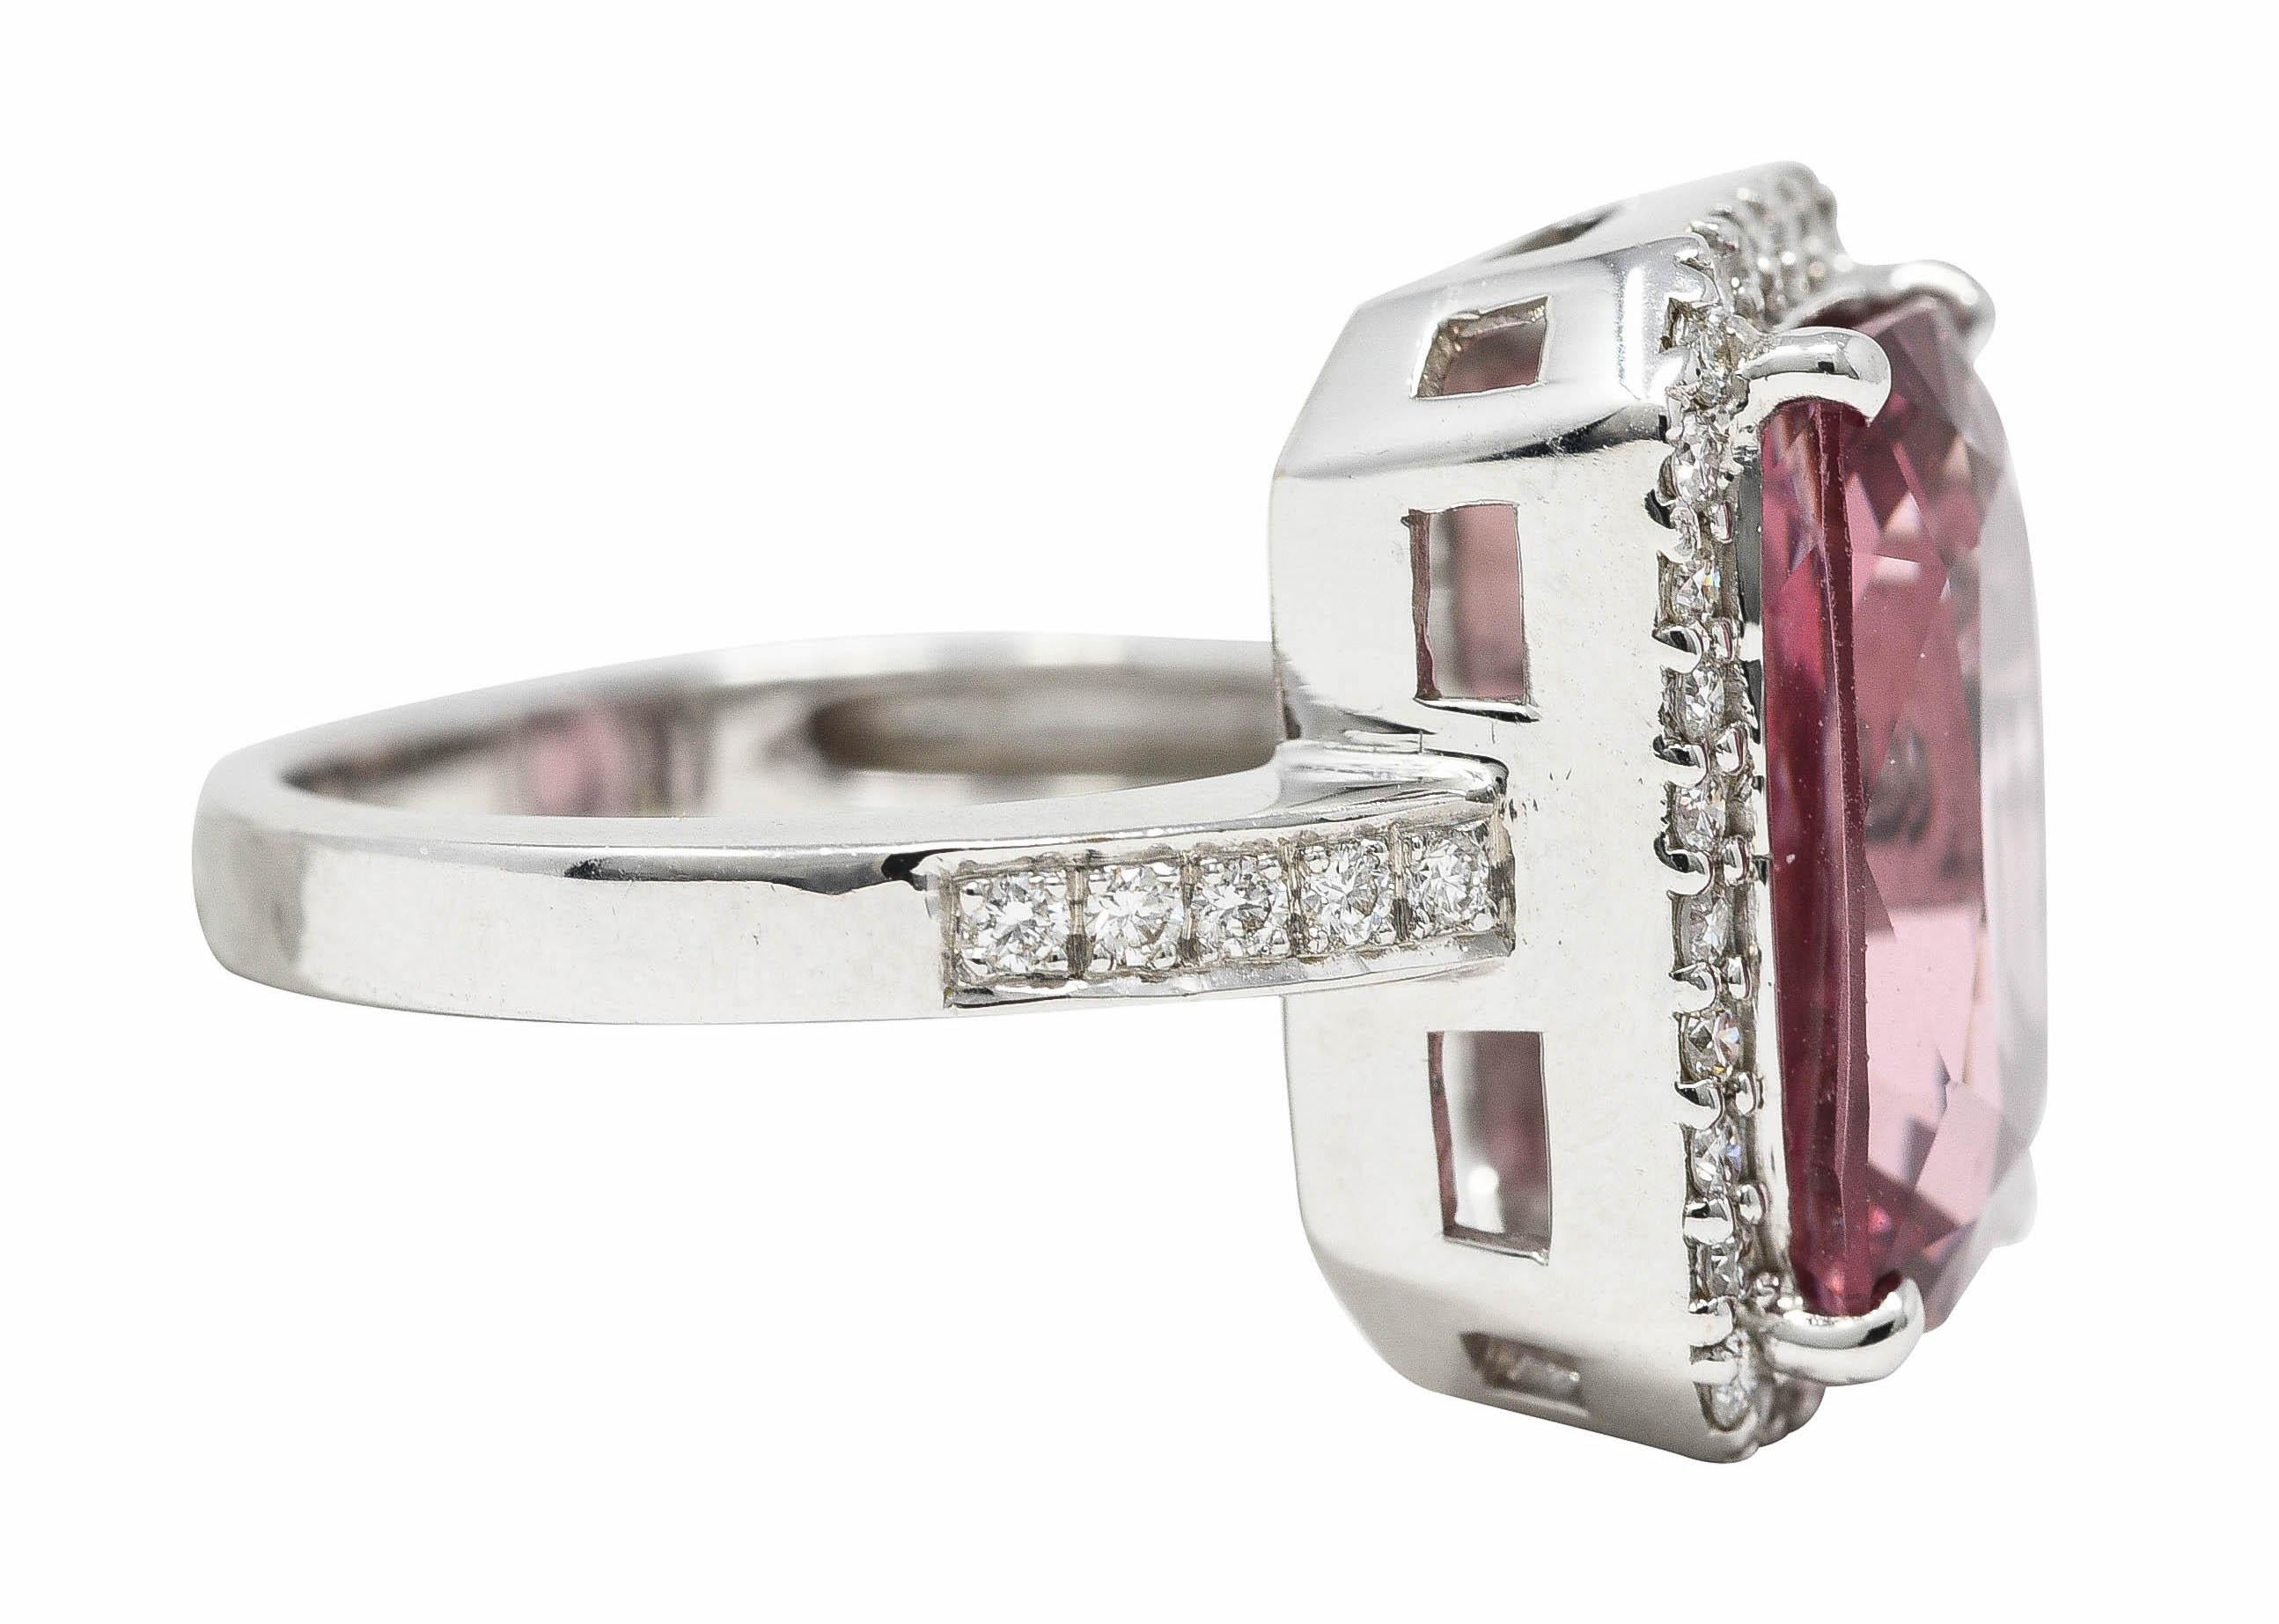 Contemporary 6.52 CTW Cushion Cut Spinel Diamond 18 Karat White Gold Halo Cocktail Ring